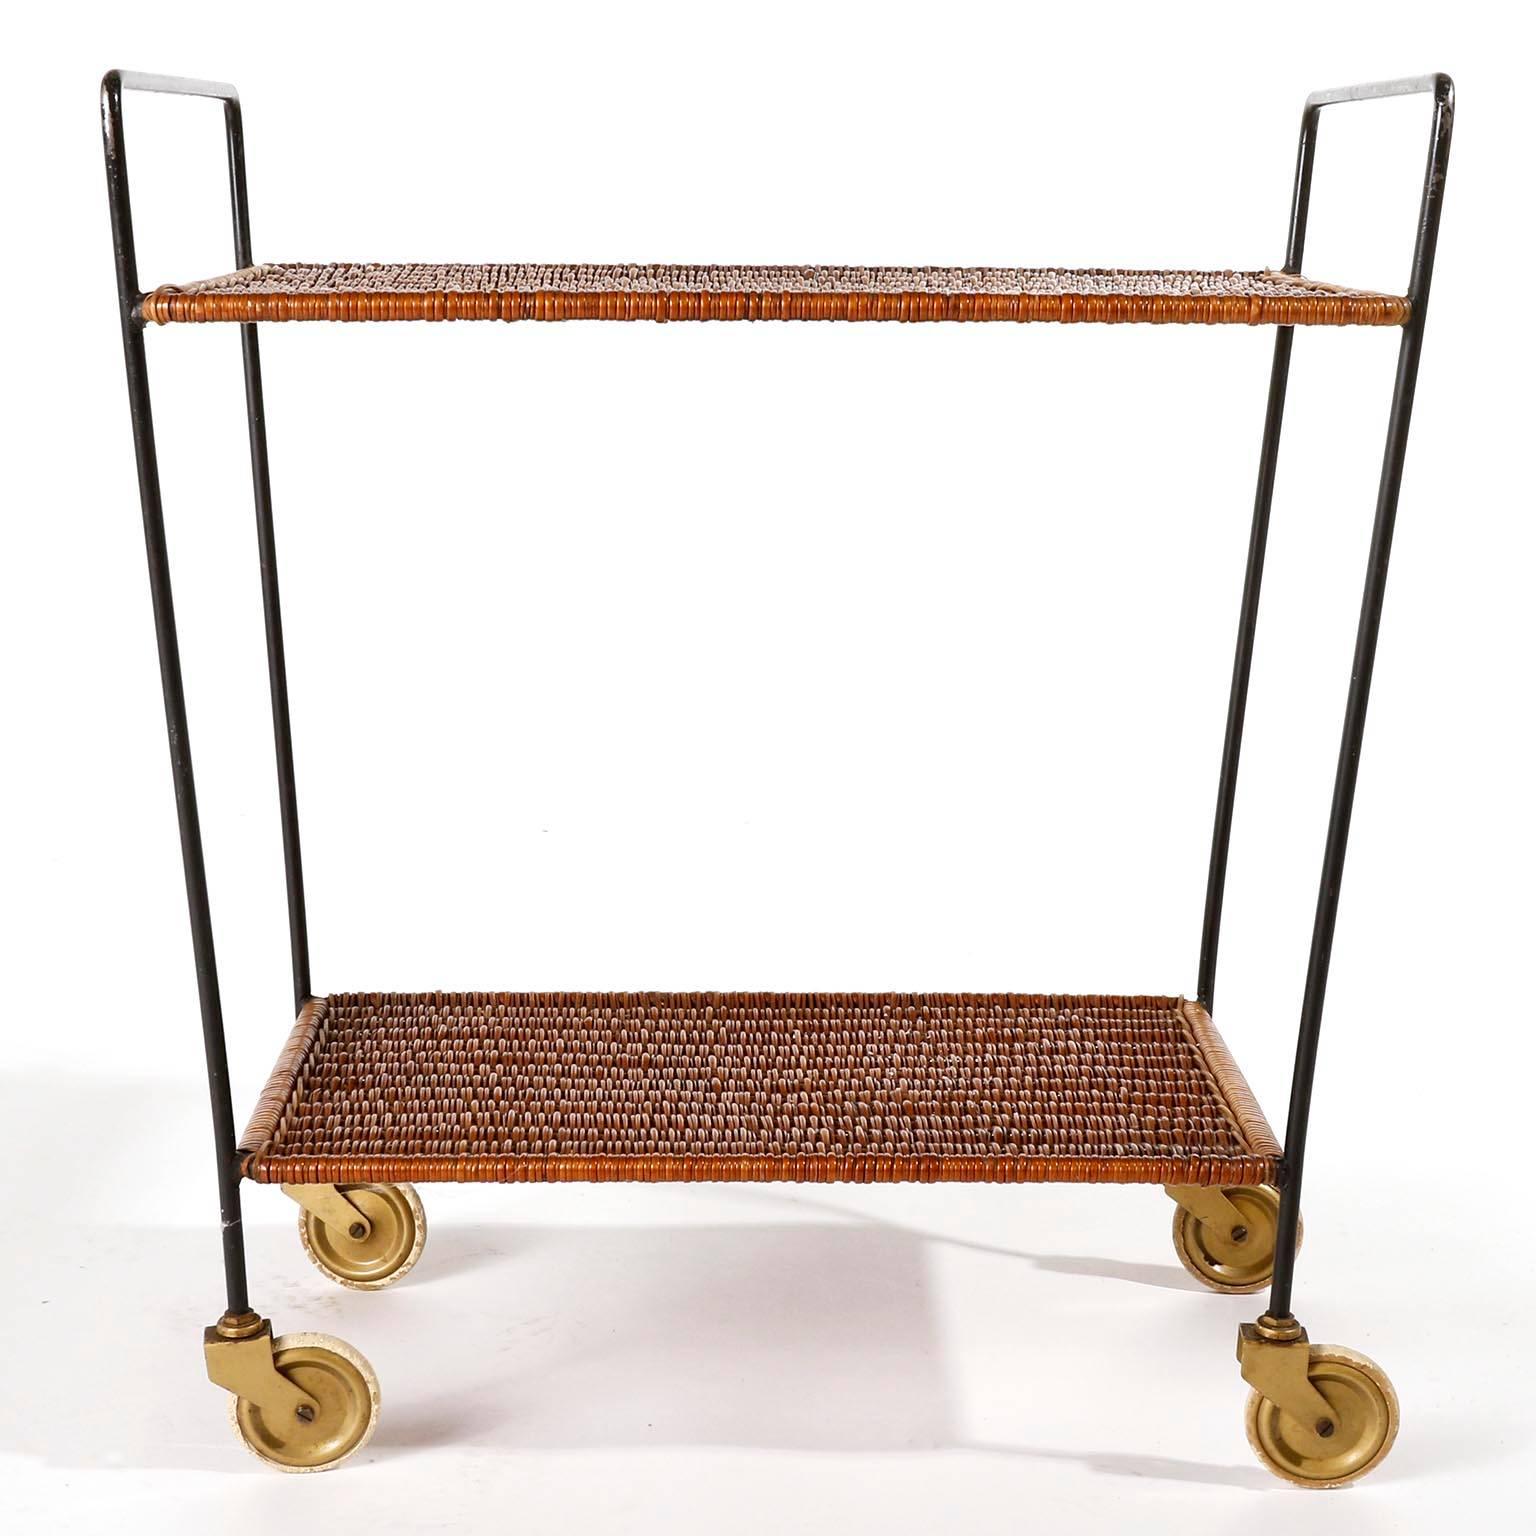 A beautiful trolley table or tea cart made of a black painted metal frame with wicker shelves manufactured in midcentury in Austria, circa 1950.

The wicker is in excellent condition. Wear of use on the metal particularly on the handles.